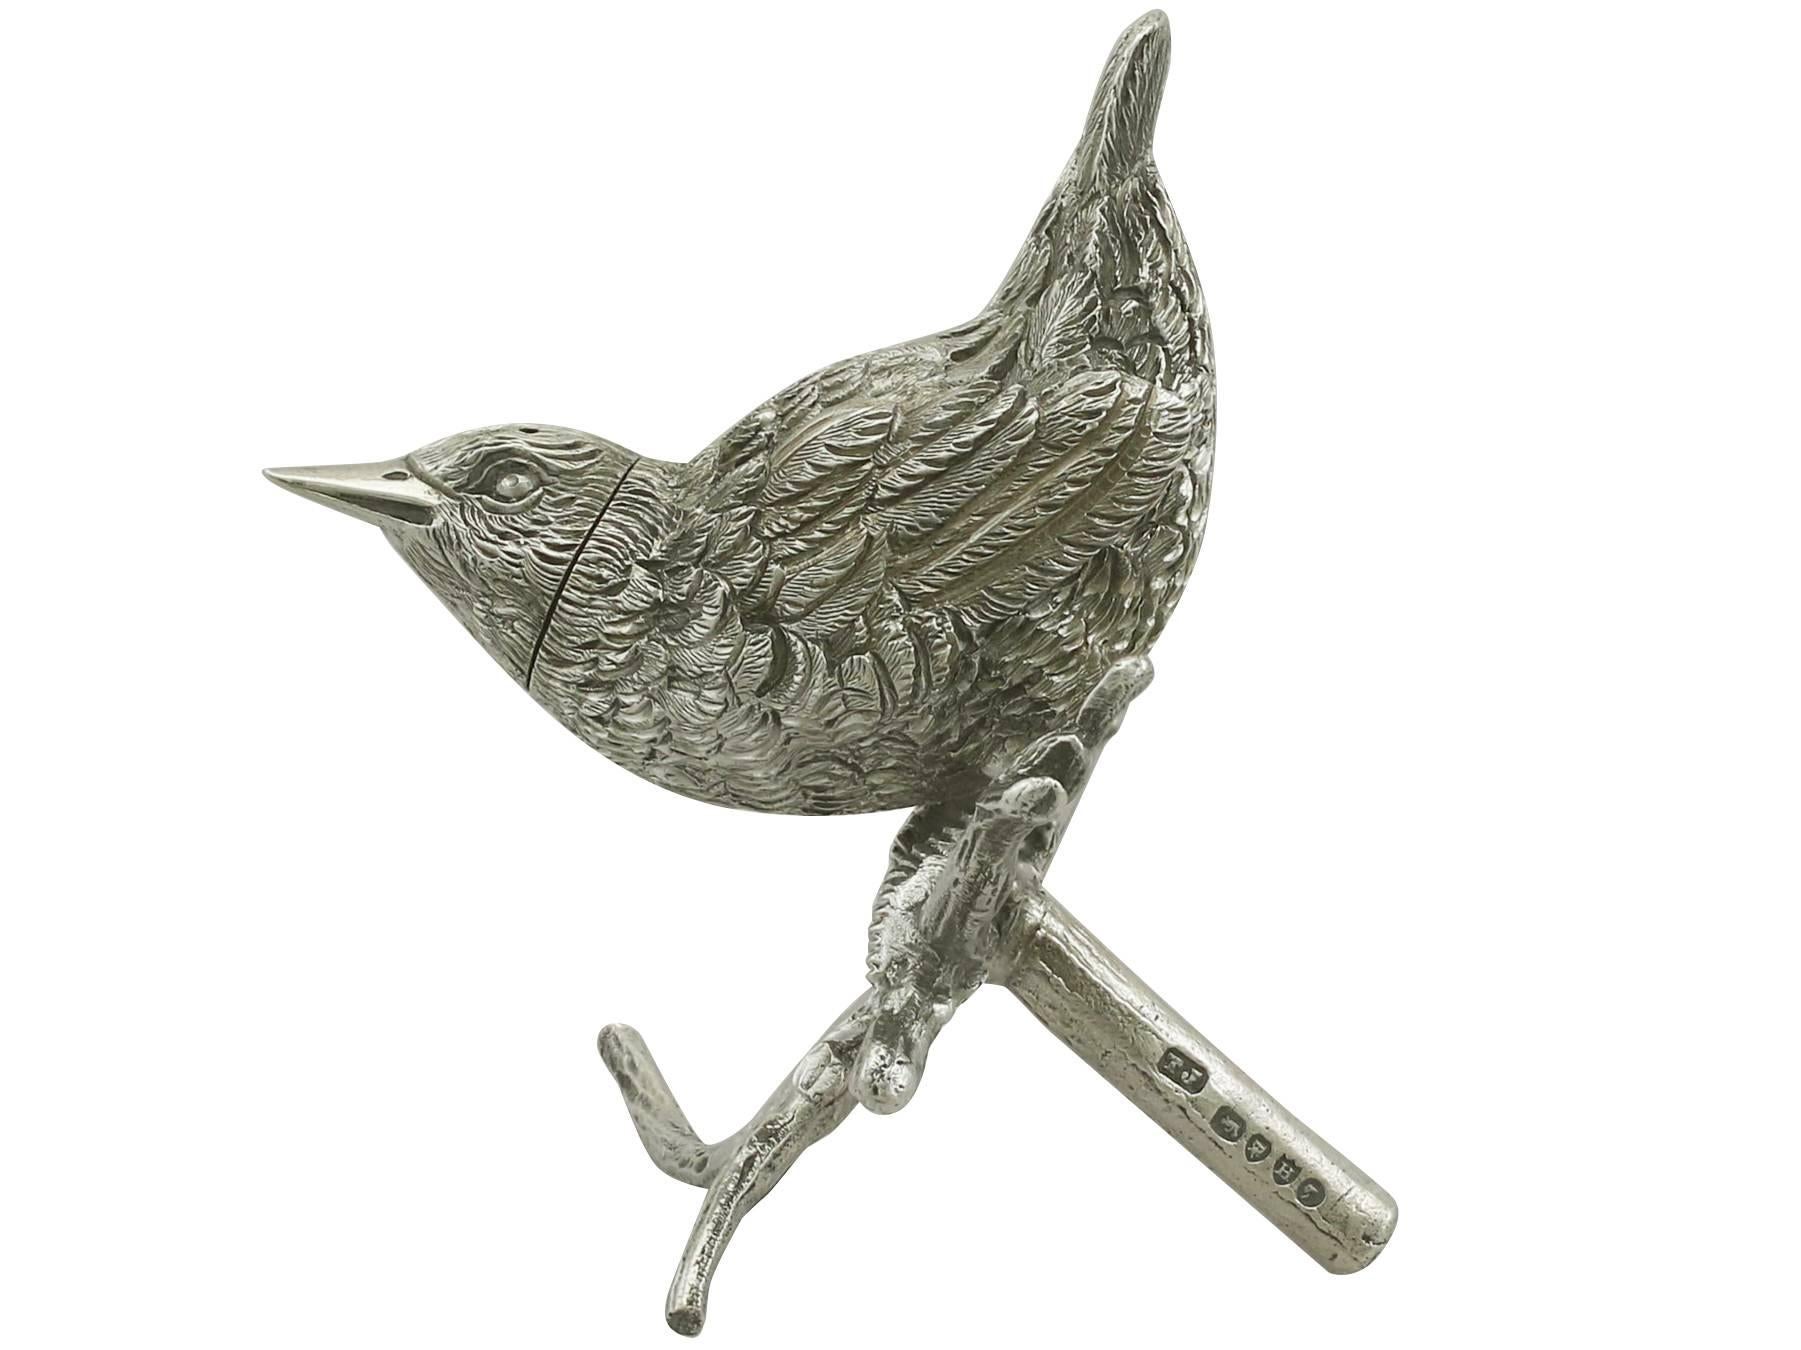 An exceptional, fine and impressive antique Victorian English cast sterling silver pepperette realistically modelled in the form of a bird; an addition to our range of silver novelty items.

This exceptional antique Victorian sterling silver